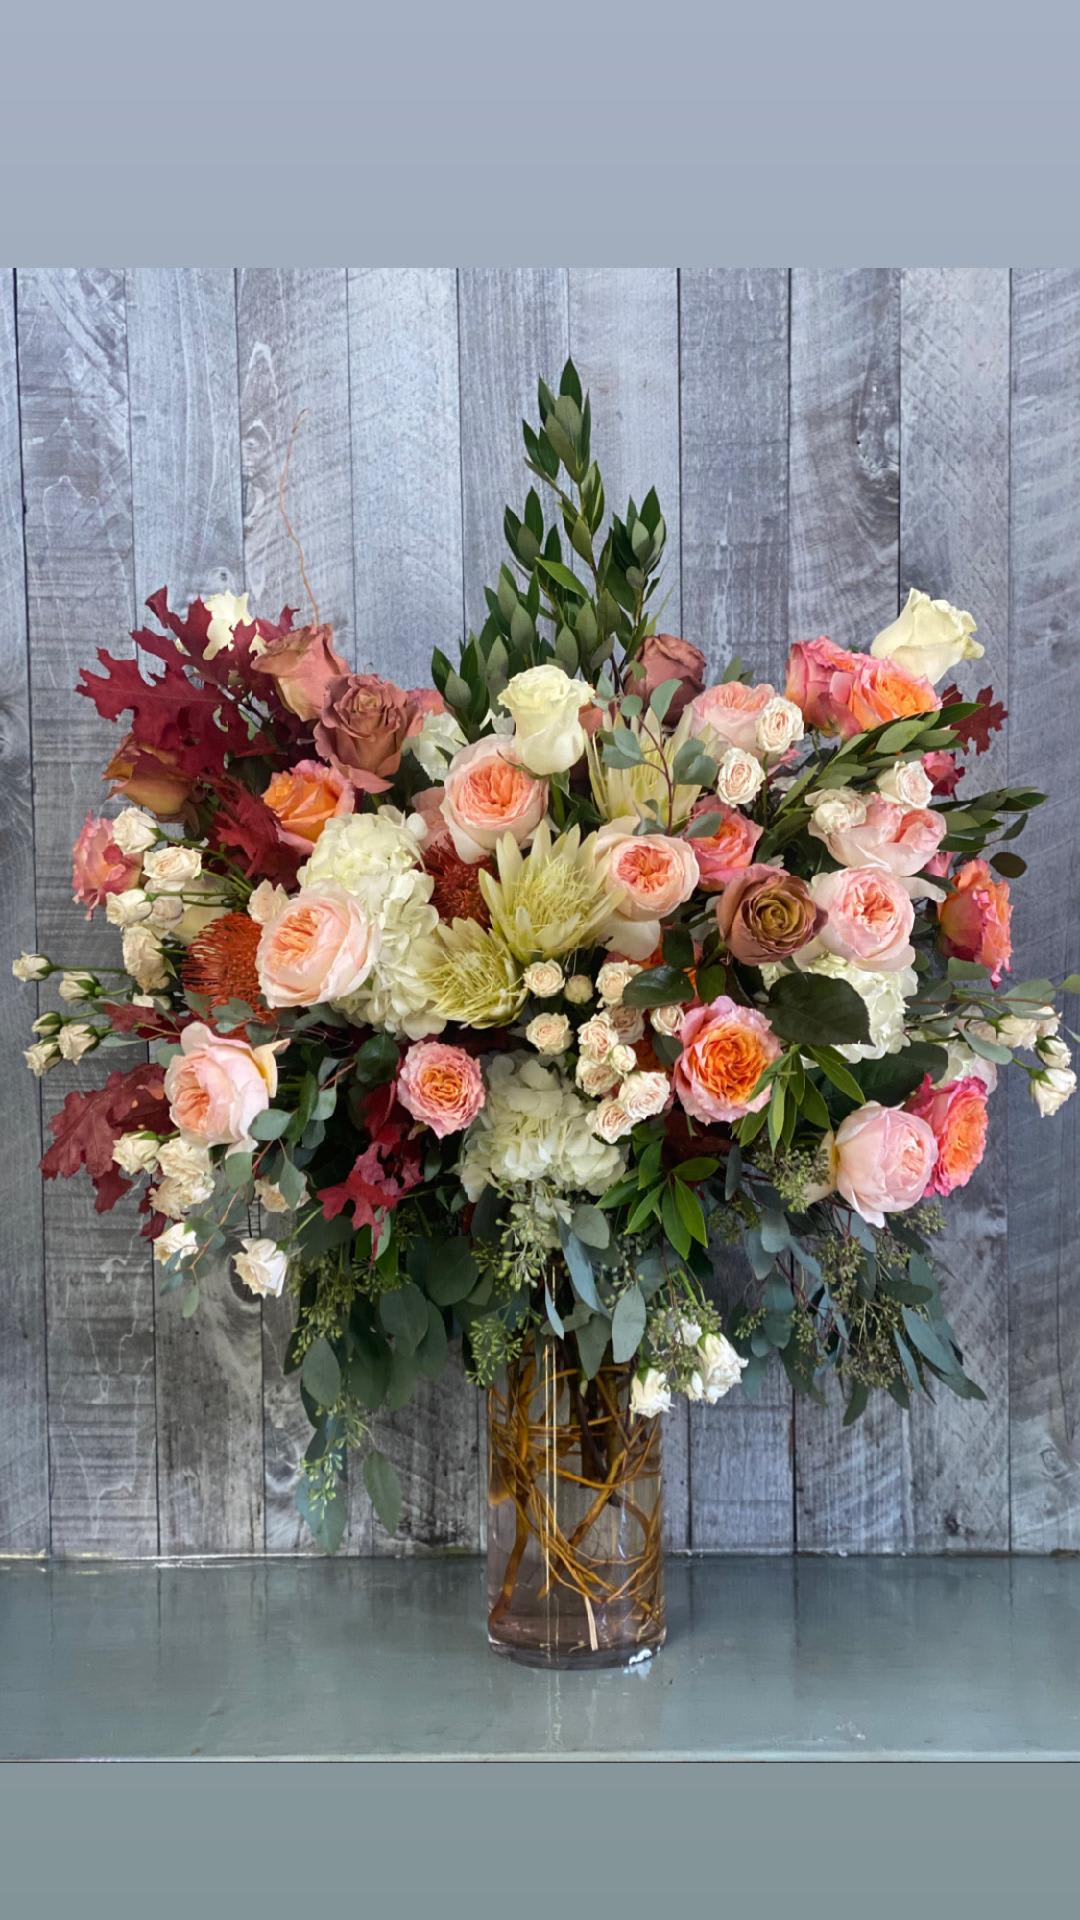 Symphony of color - A tall arrangement with the nicest selection of seasonal flowers